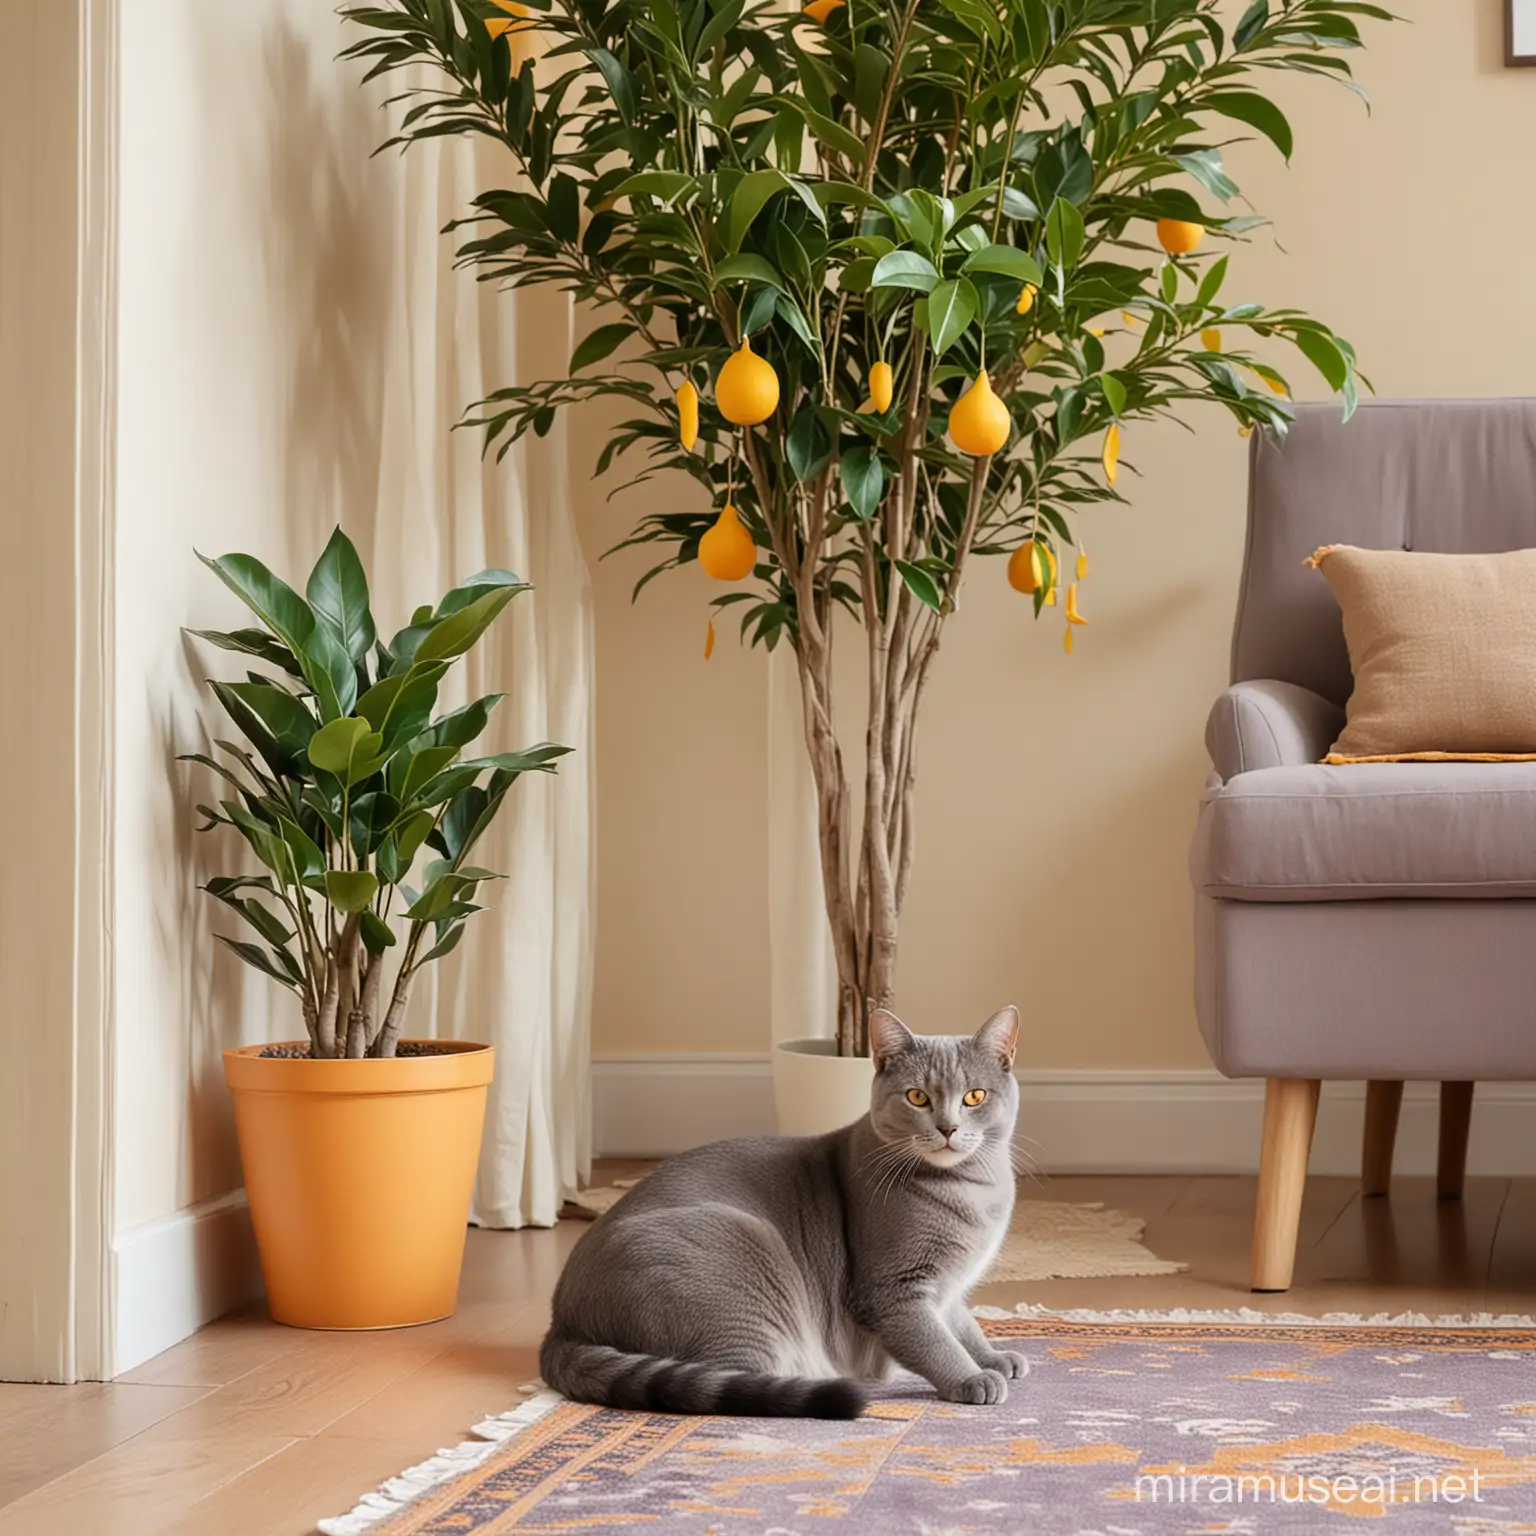 Gray Cat Relaxing by Ficus Tree in Vibrant Living Room Setting